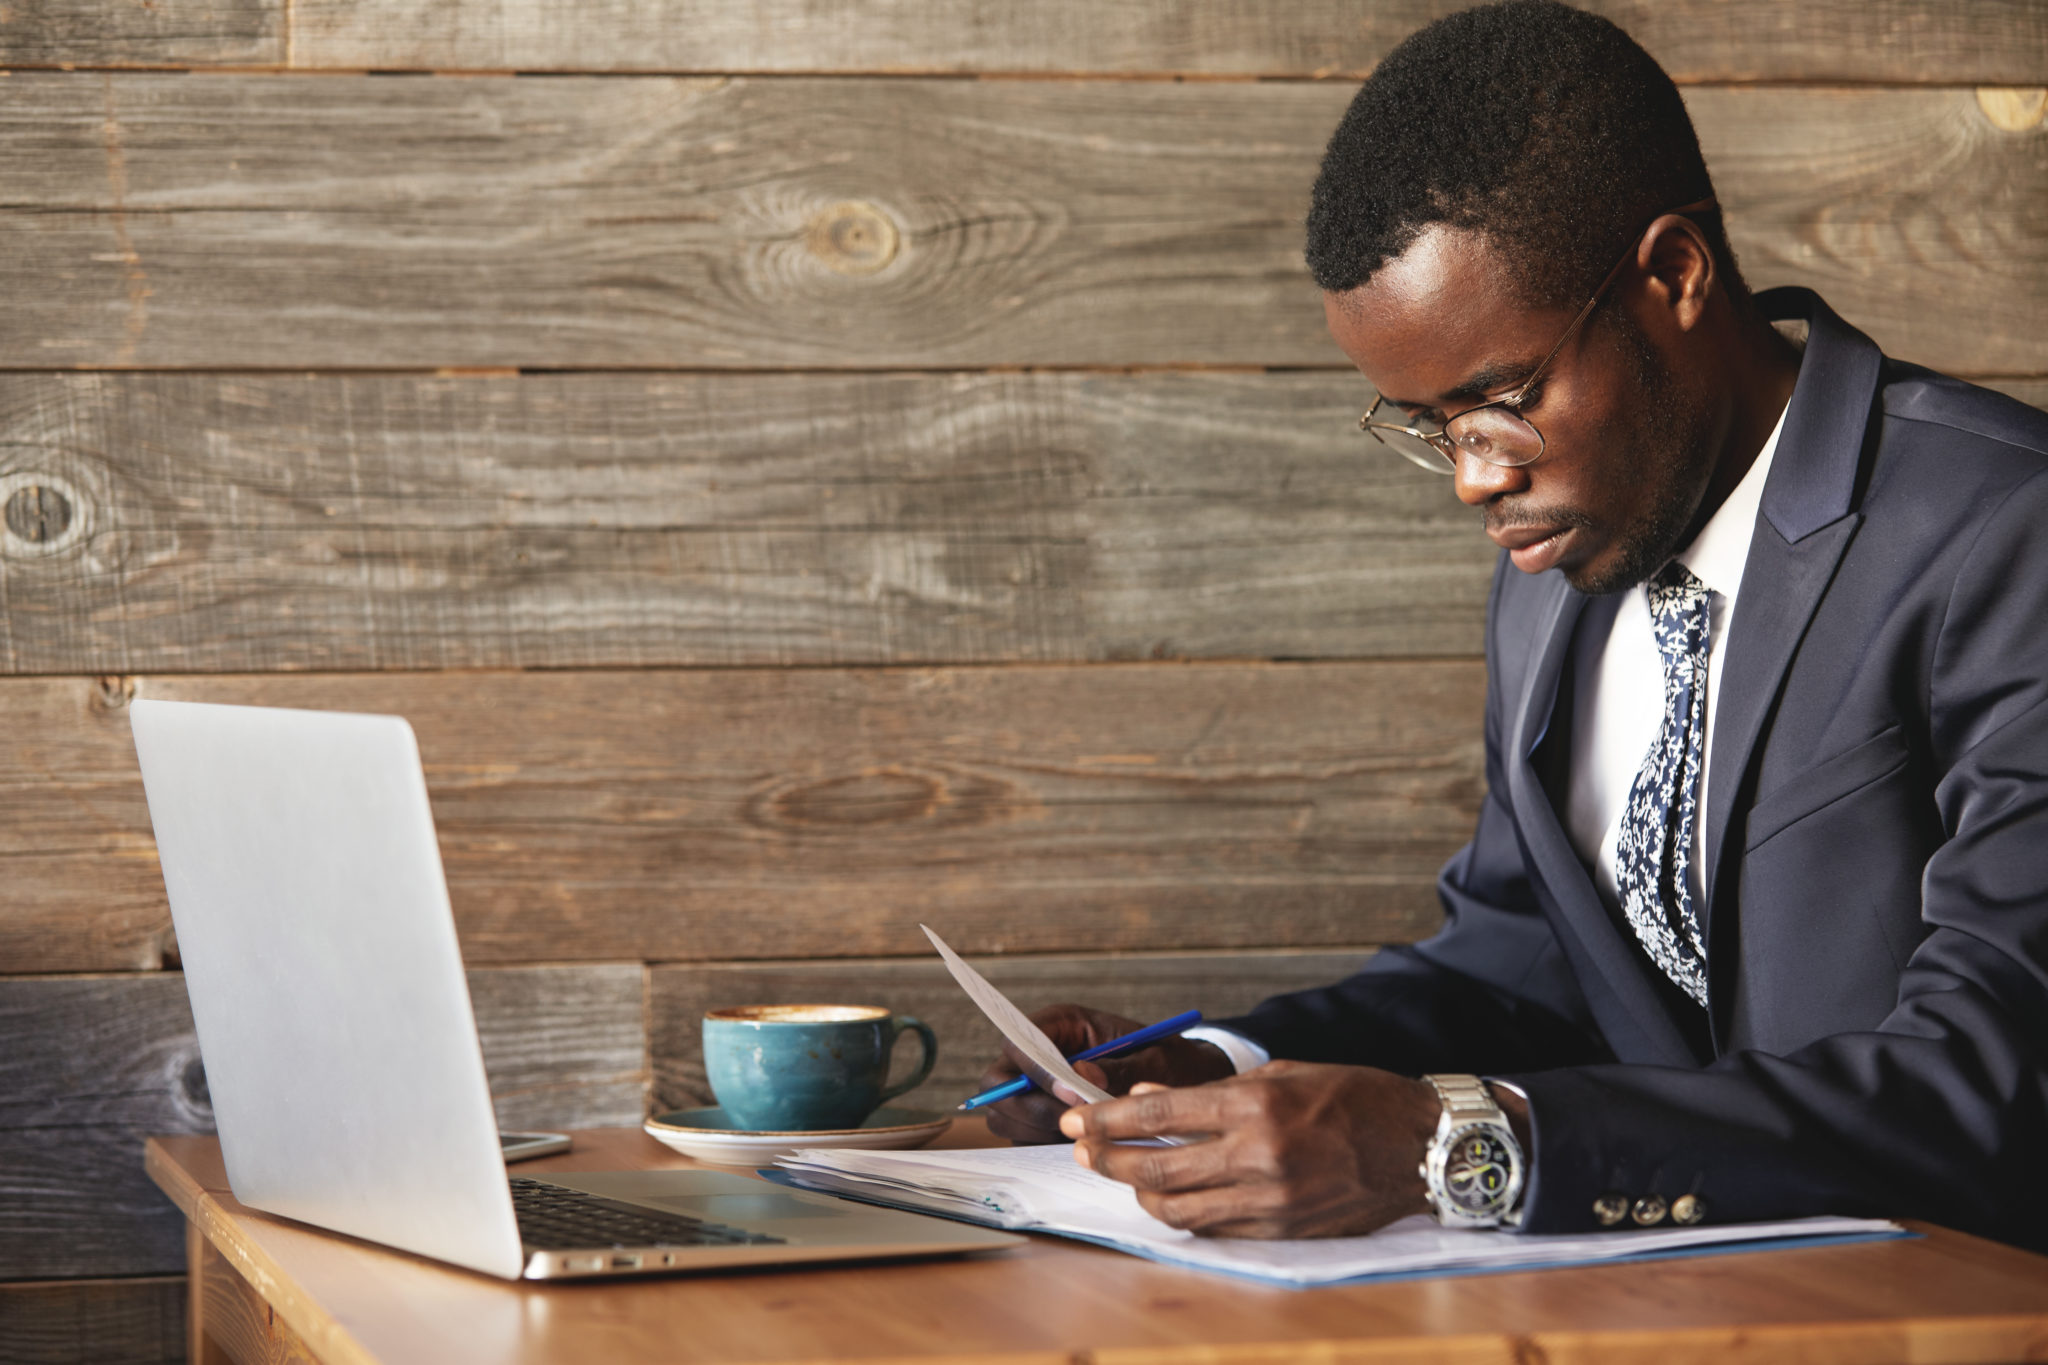 Young and successful businessman looking at contract and reading information in documents with blue pen in hand. Focused African man took laptop and digital devices with wi-fi for productive work. Image